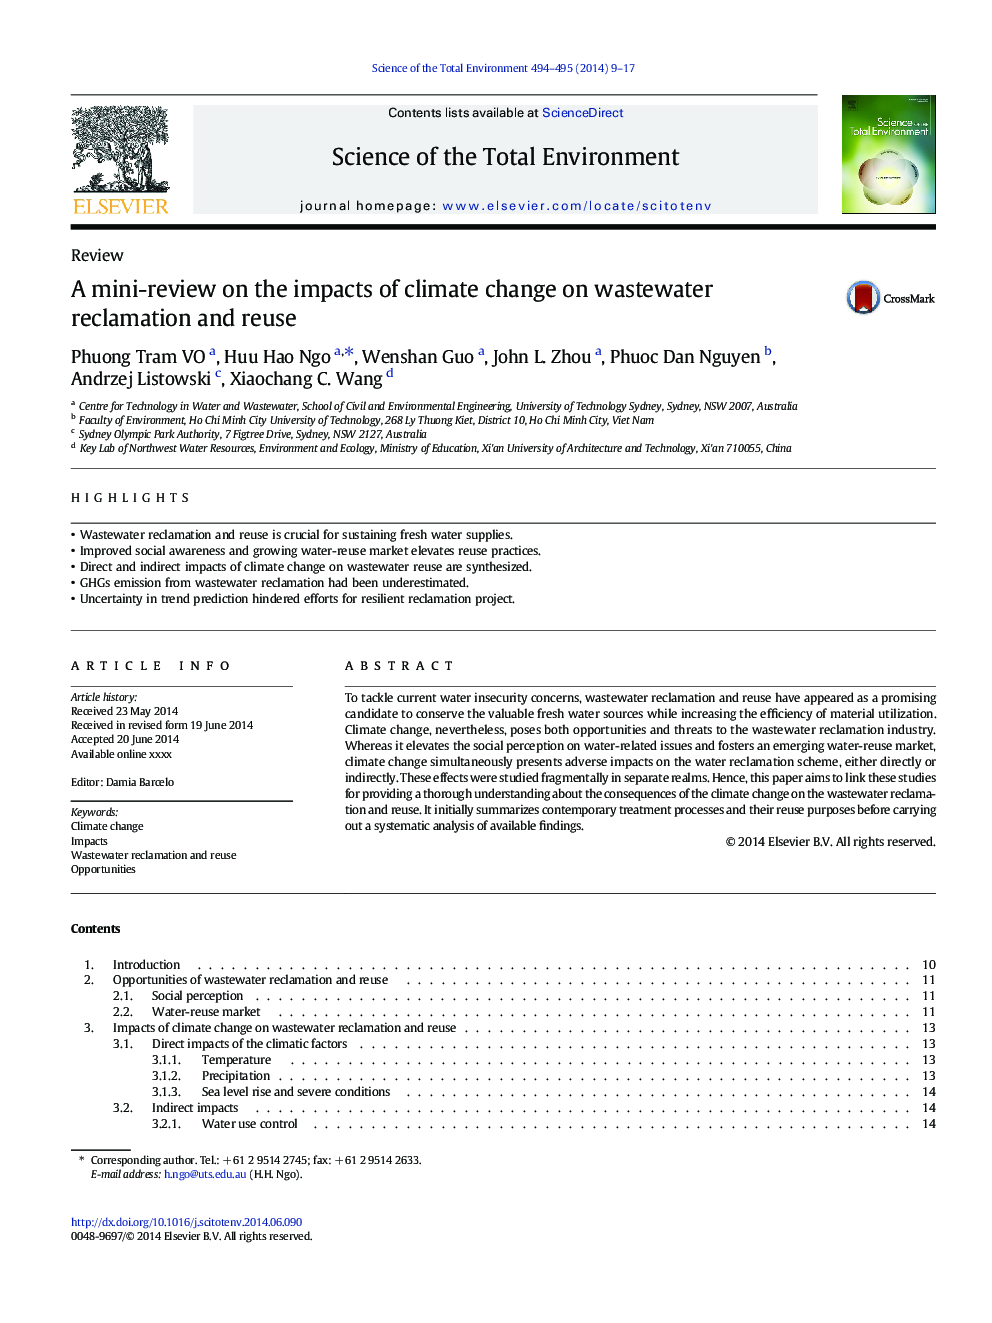 A mini-review on the impacts of climate change on wastewater reclamation and reuse